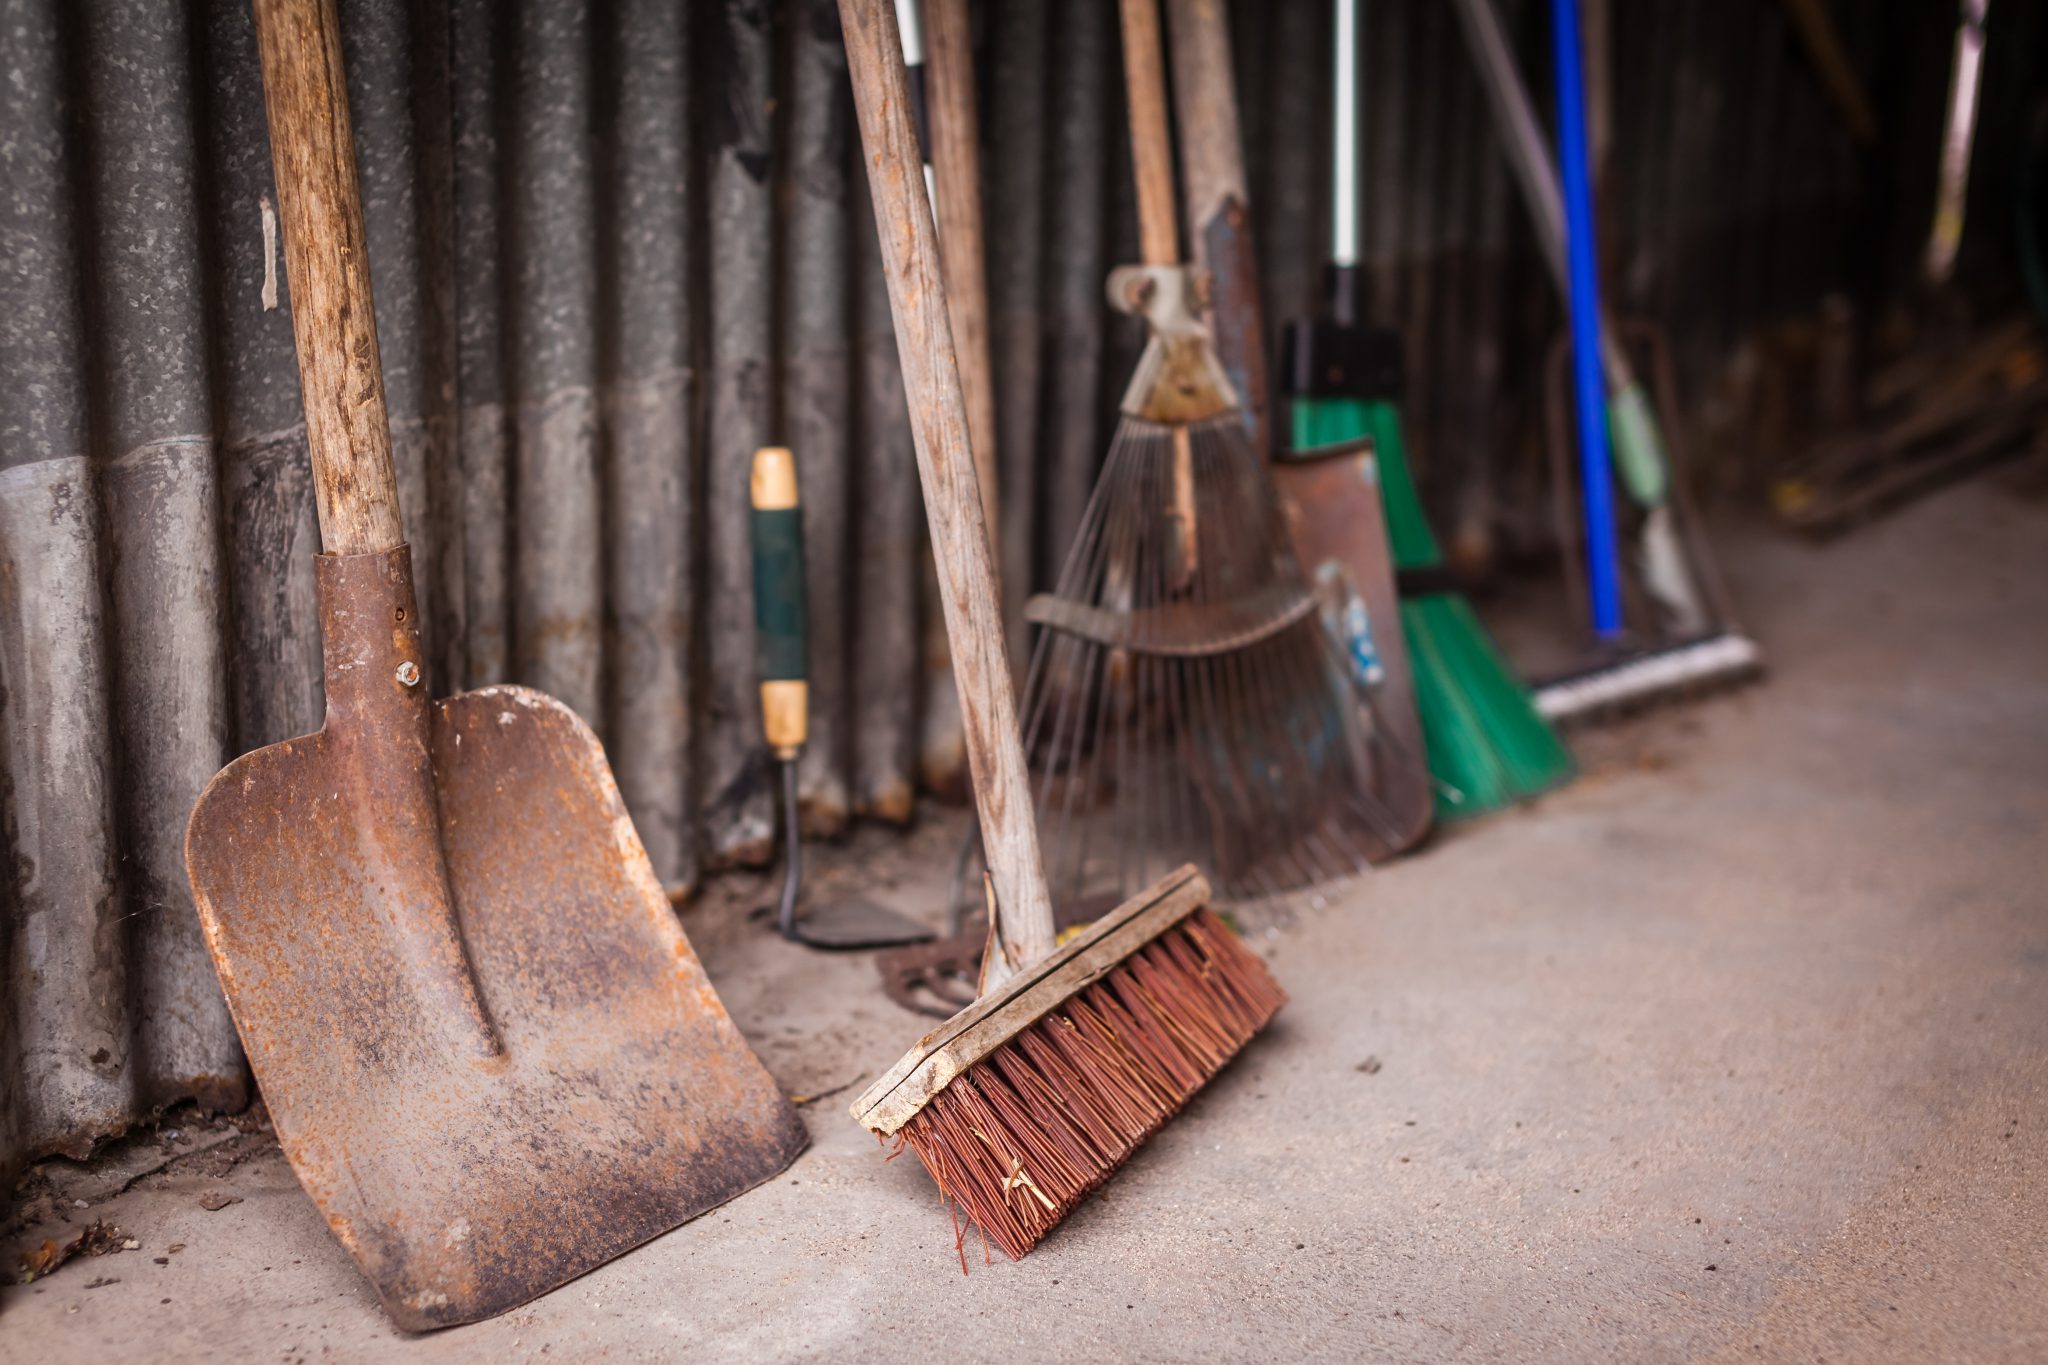 garden-tools-in-a-shed-PQVUGDH